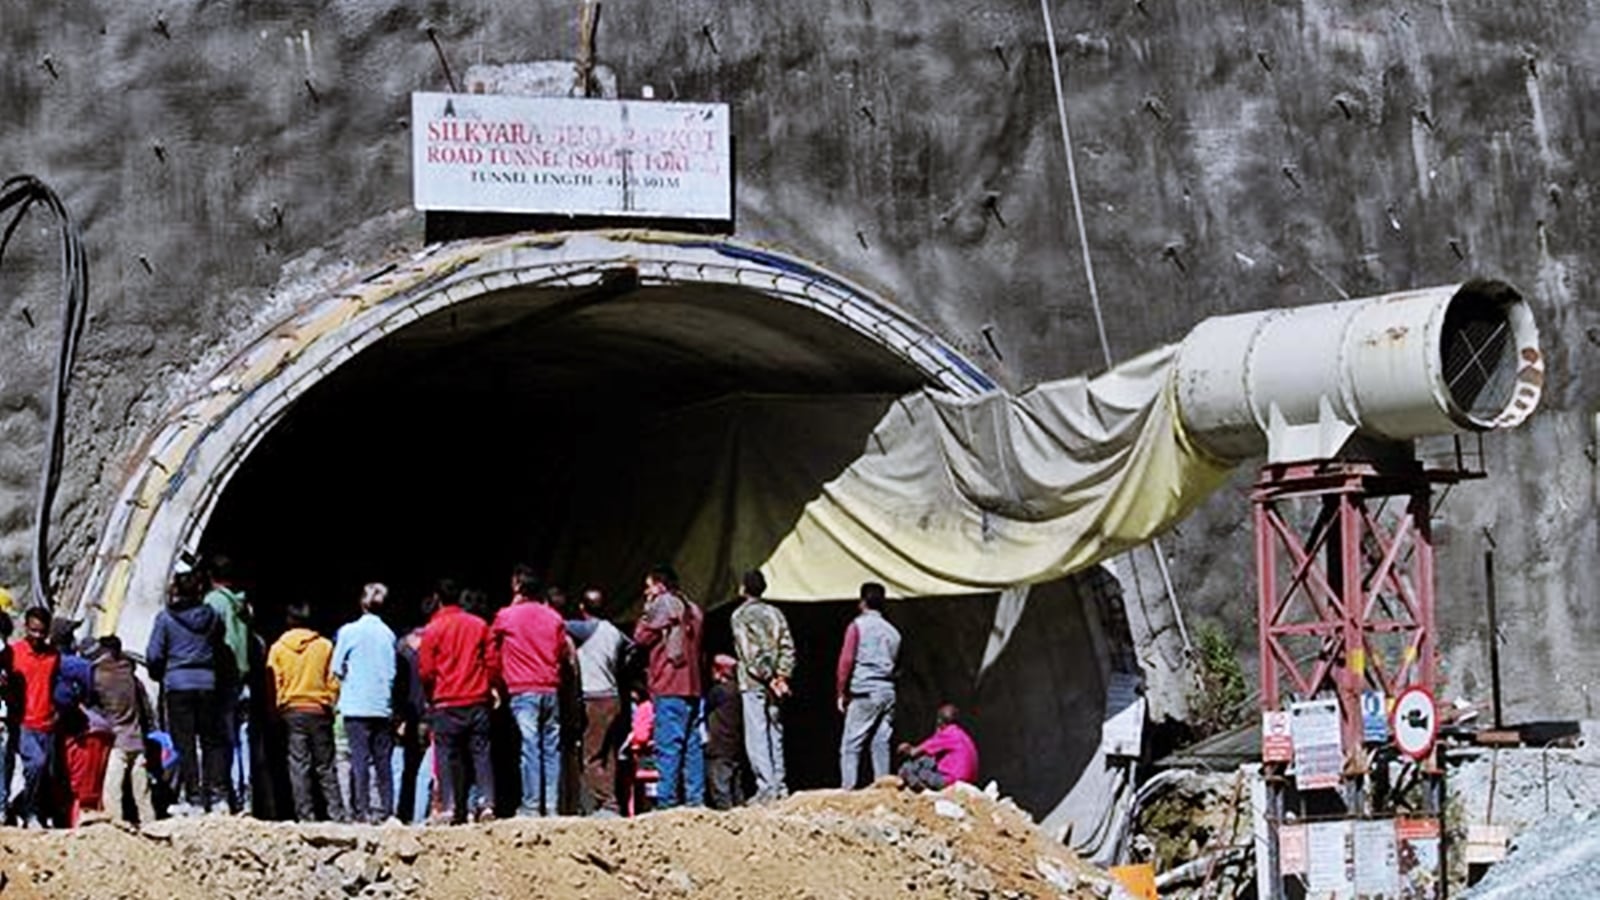 41 workers are trapped in the tunnel